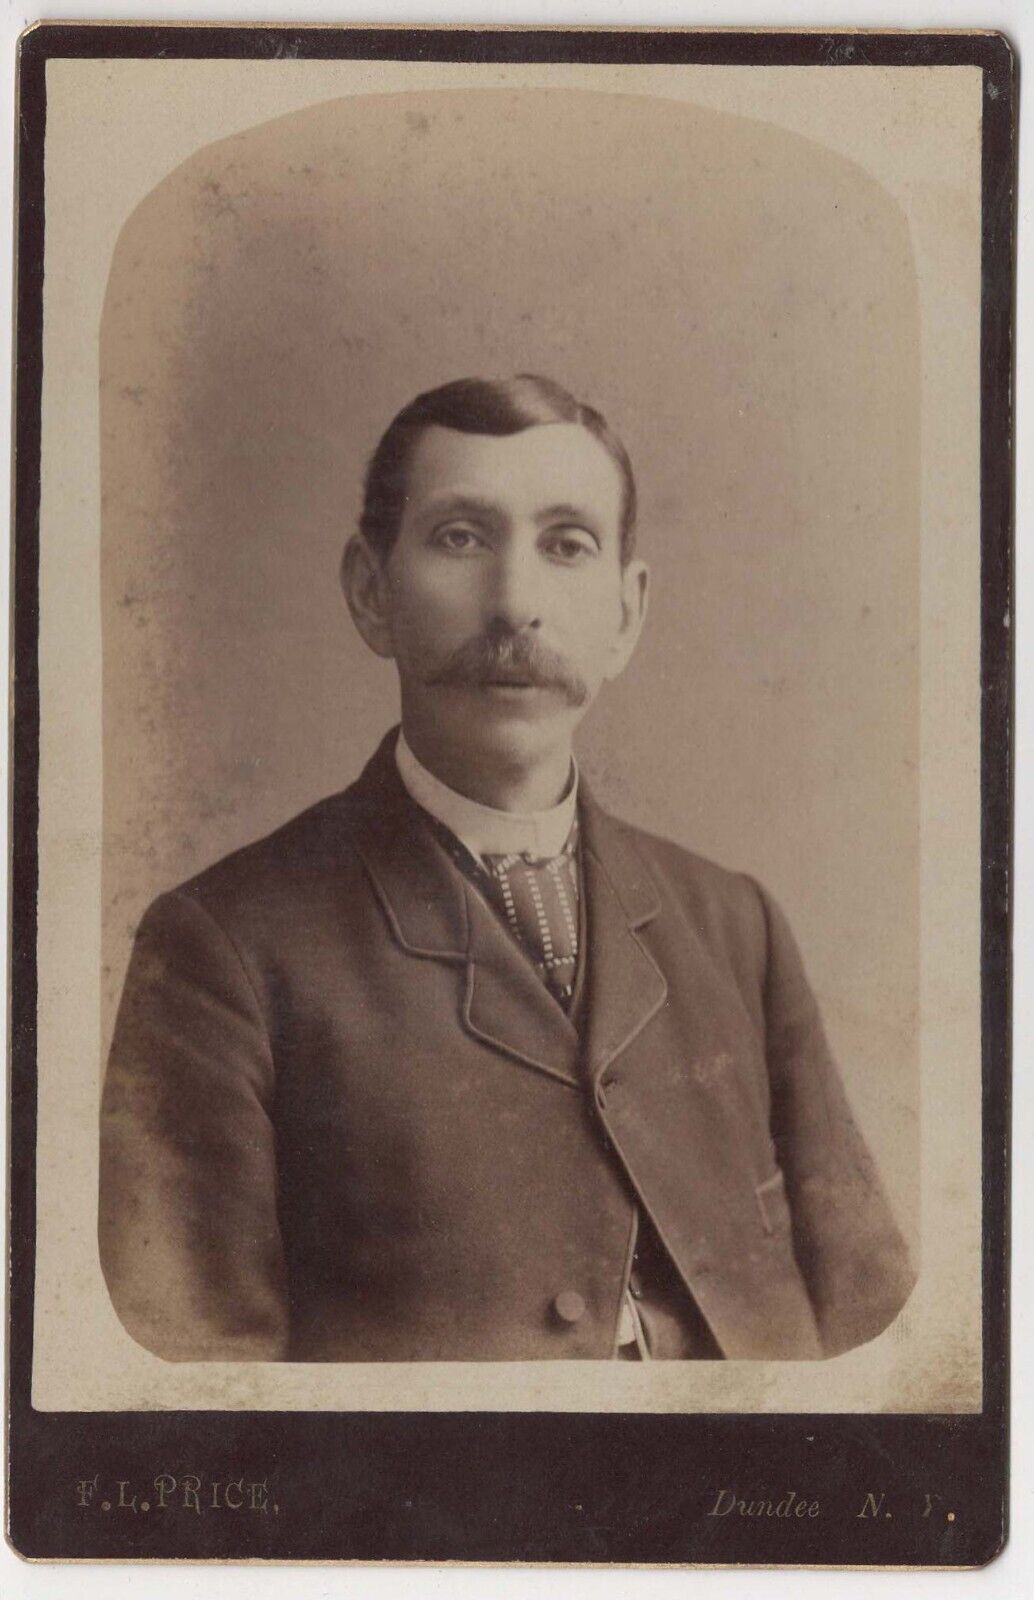 CIRCA 1880s CABINET CARD F.L. PRICE HANDSOME MAN WITH MUSTACHE DUNDEE NEW YORK